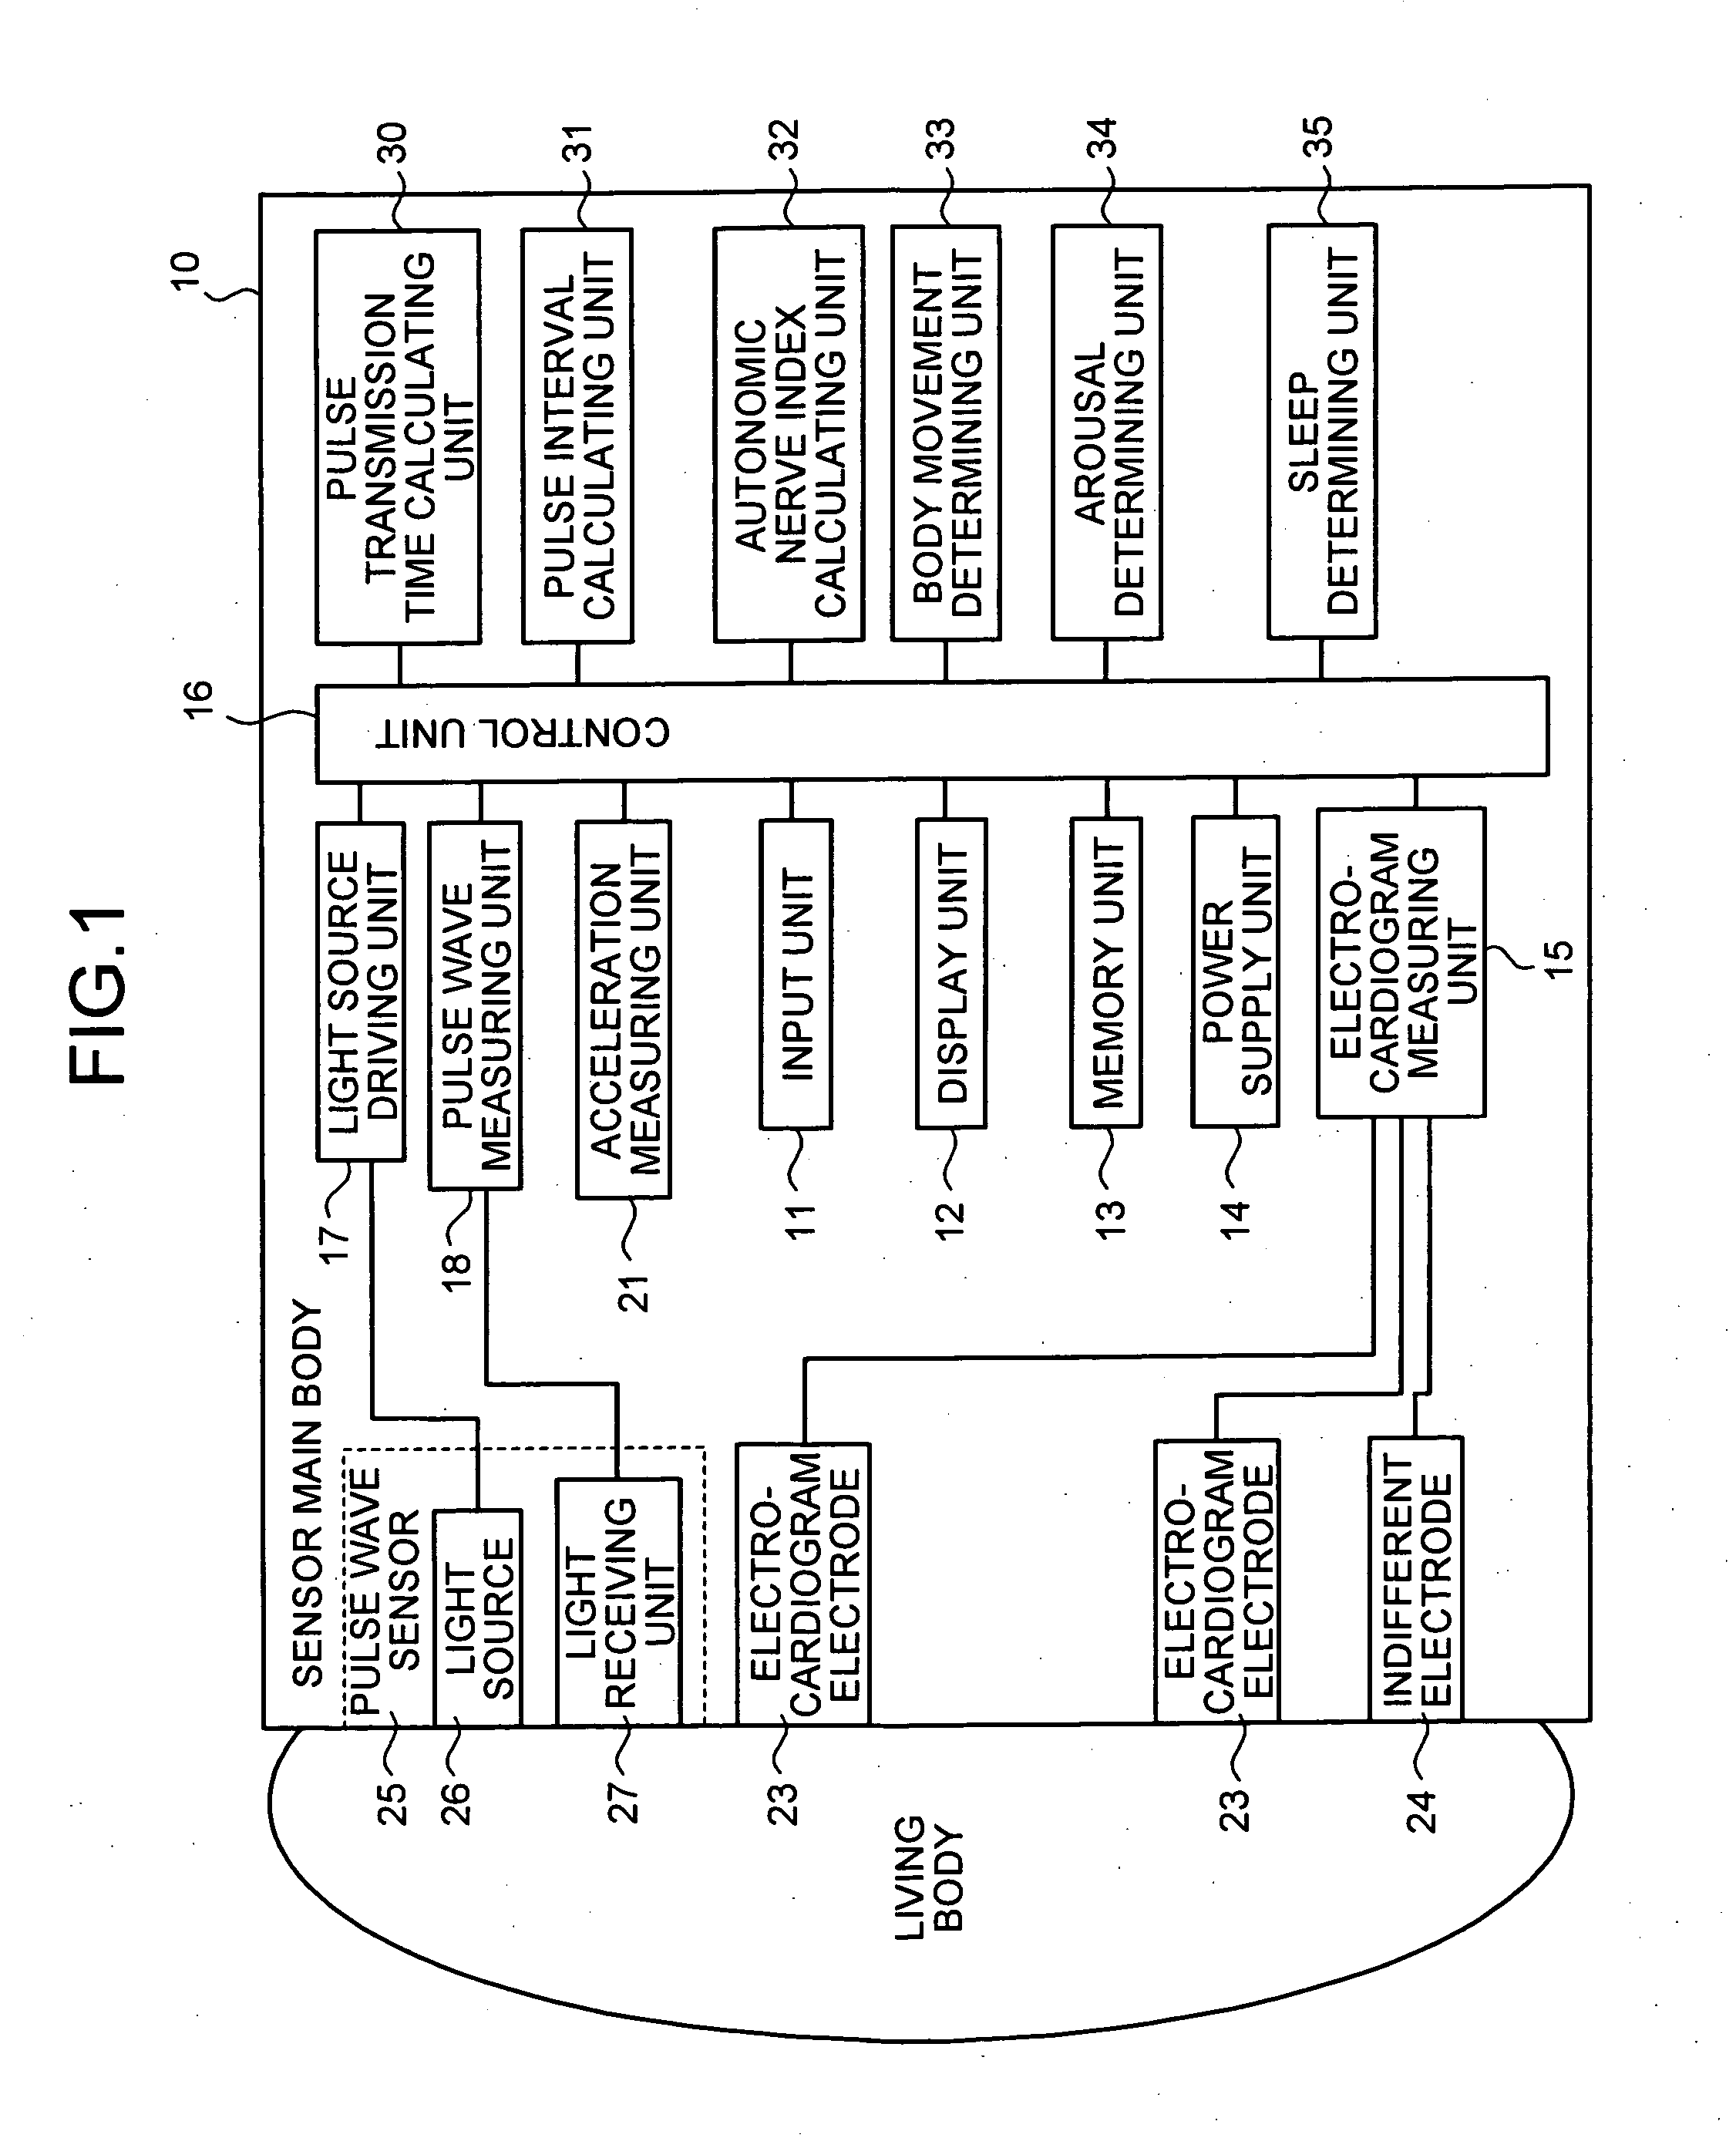 Health management apparatus, health management system, health management method and computer program product